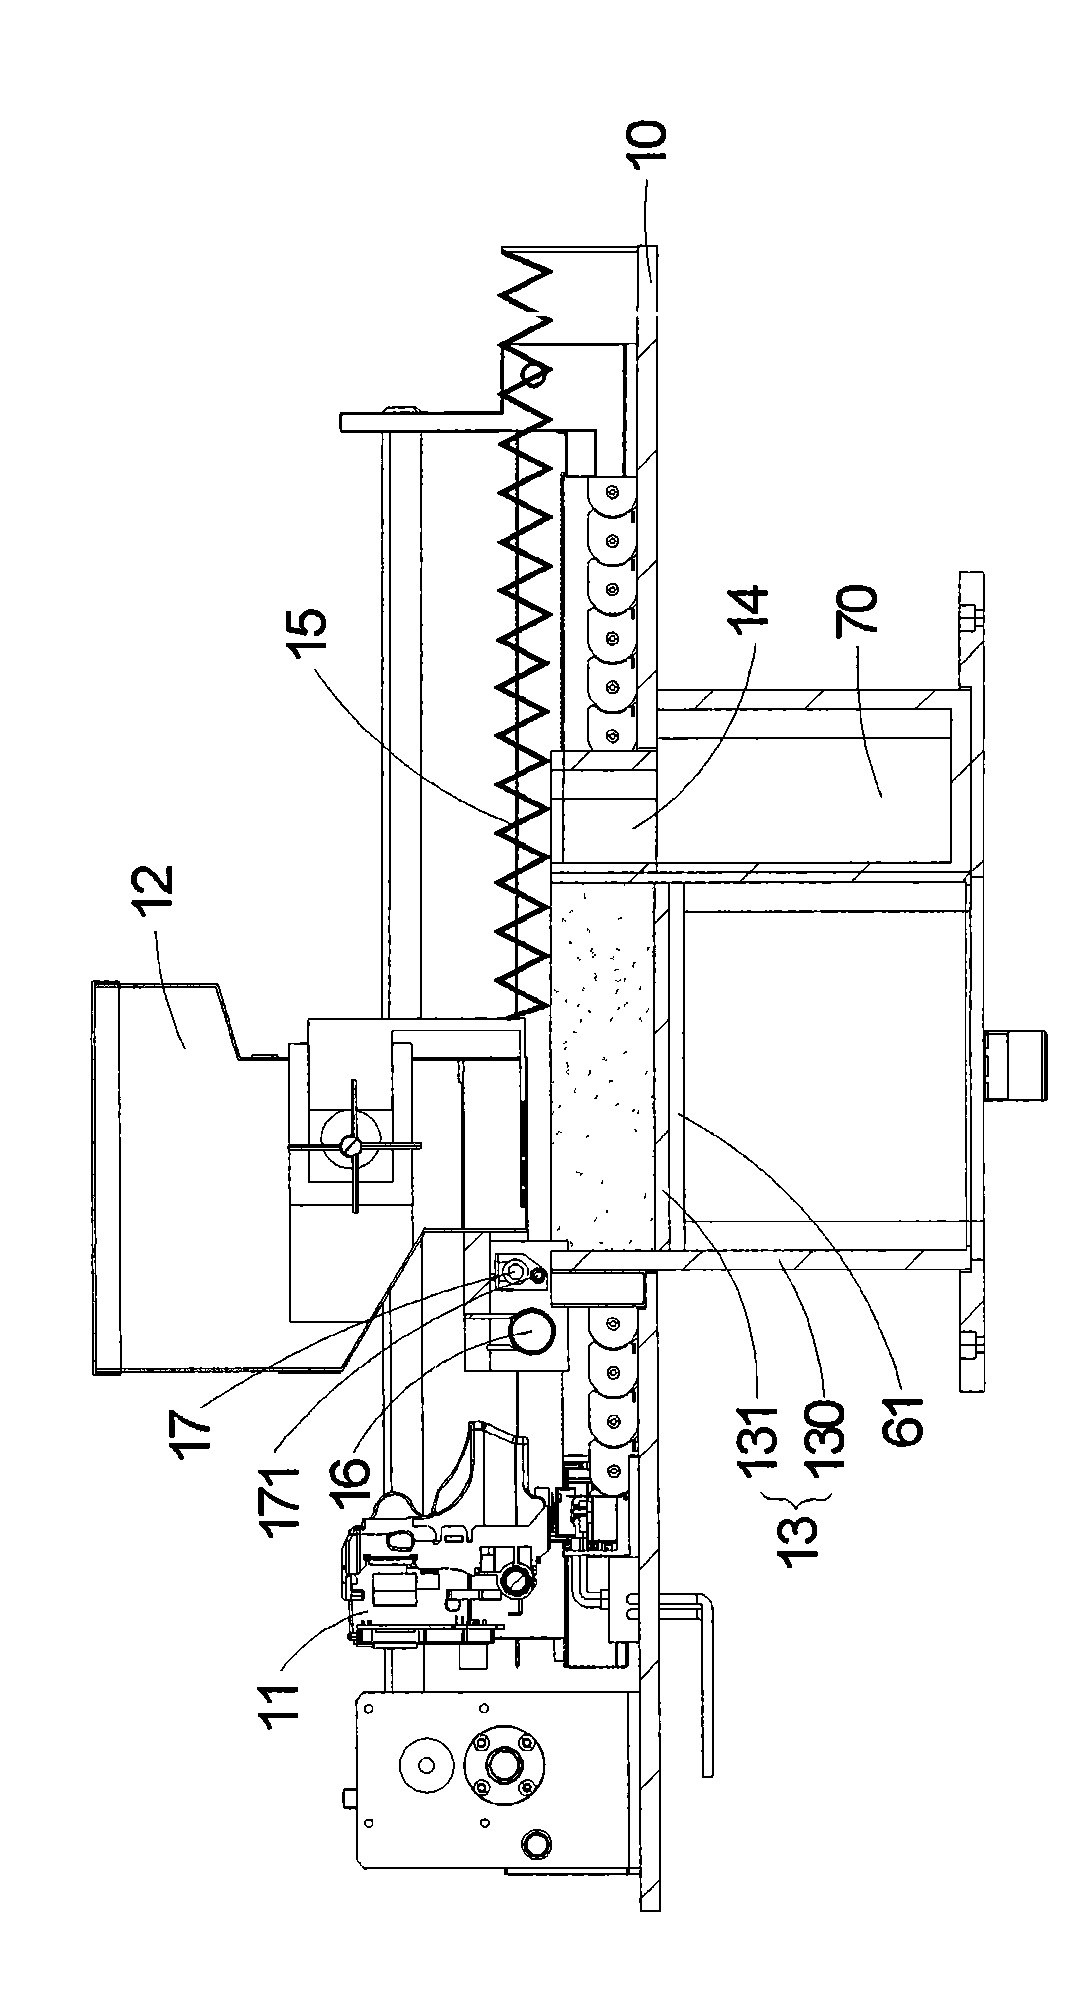 Stereoscopic moulding device